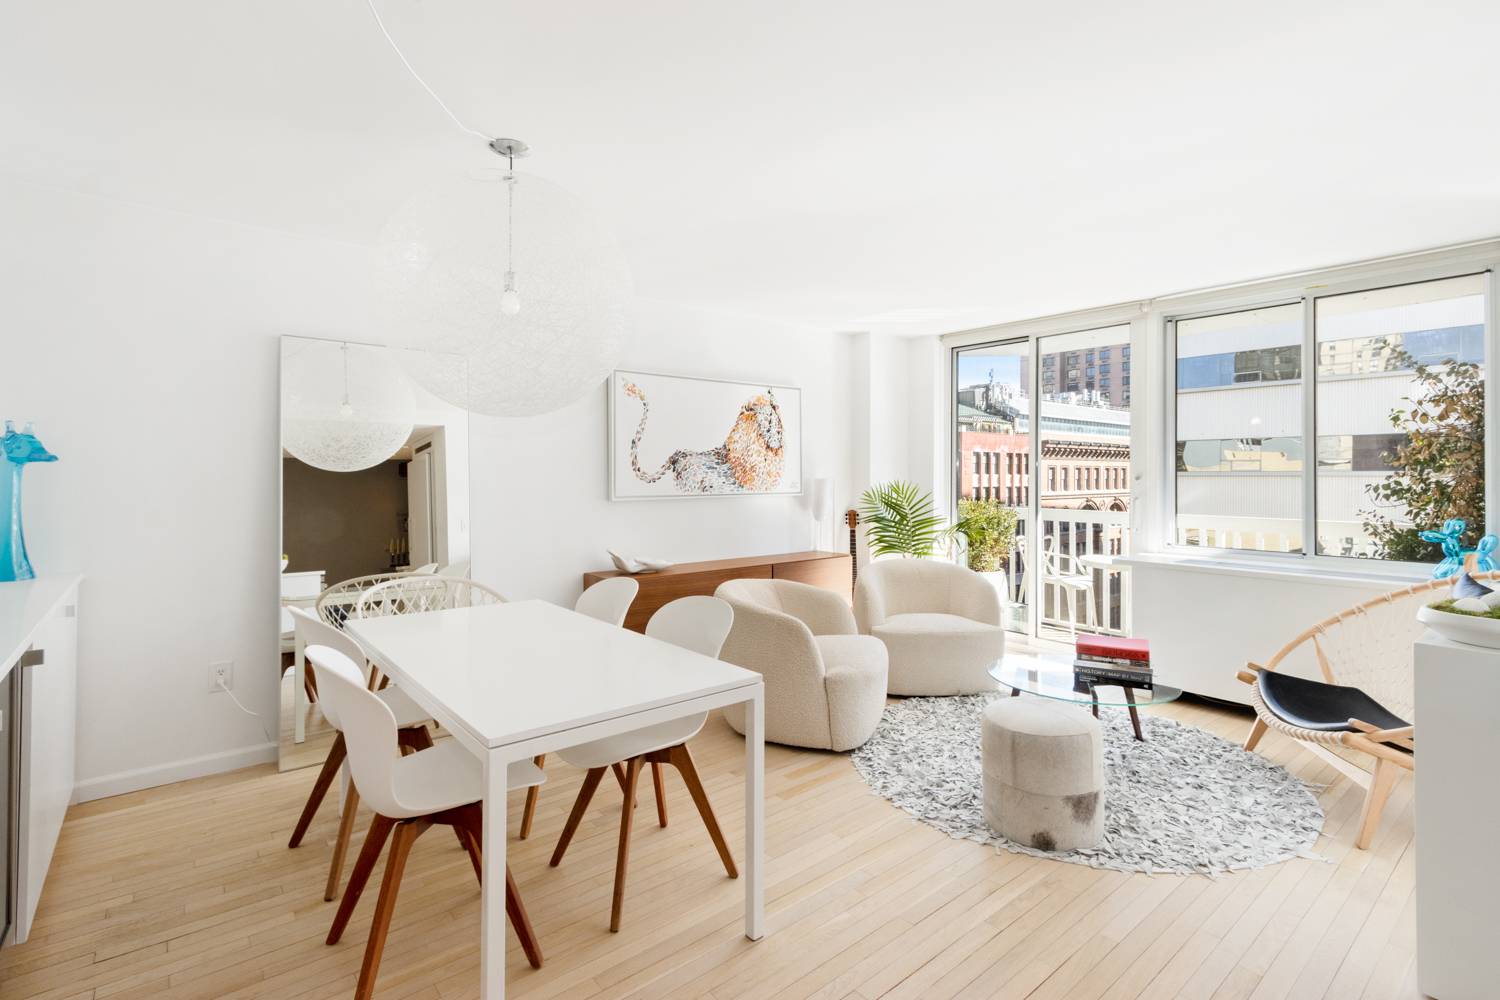 Newly Available ! Light filled open concept apartment right next to Madison square park with designer finishes and a light filled living space.